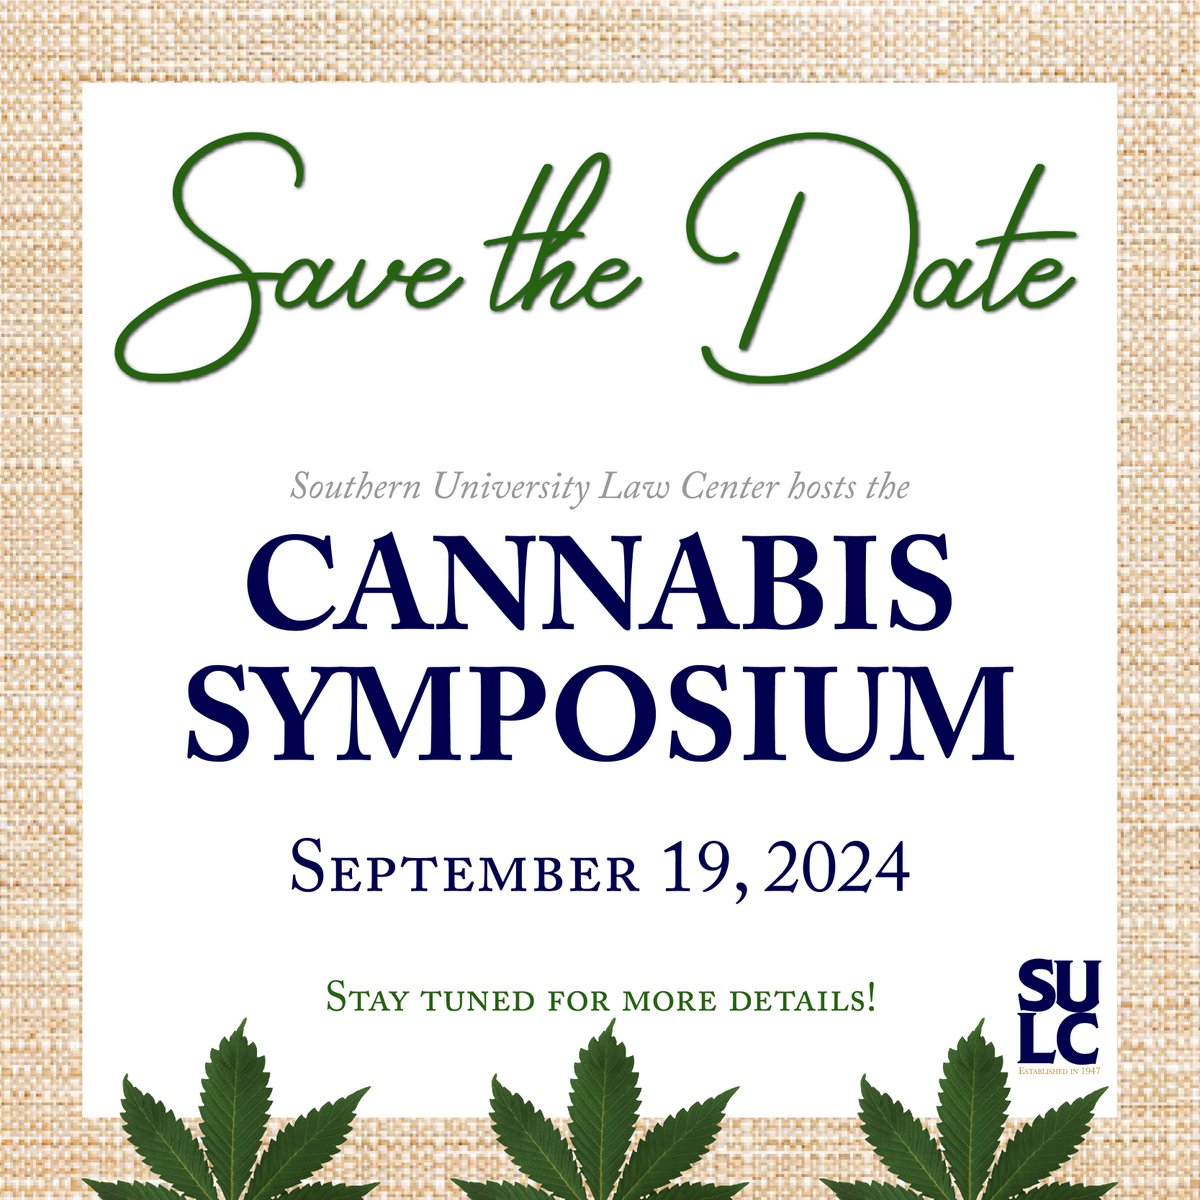 Save the date for our upcoming Cannabis Symposium happening September 19, 2024. Stay tuned for more details! #SULC #CannabisEducation